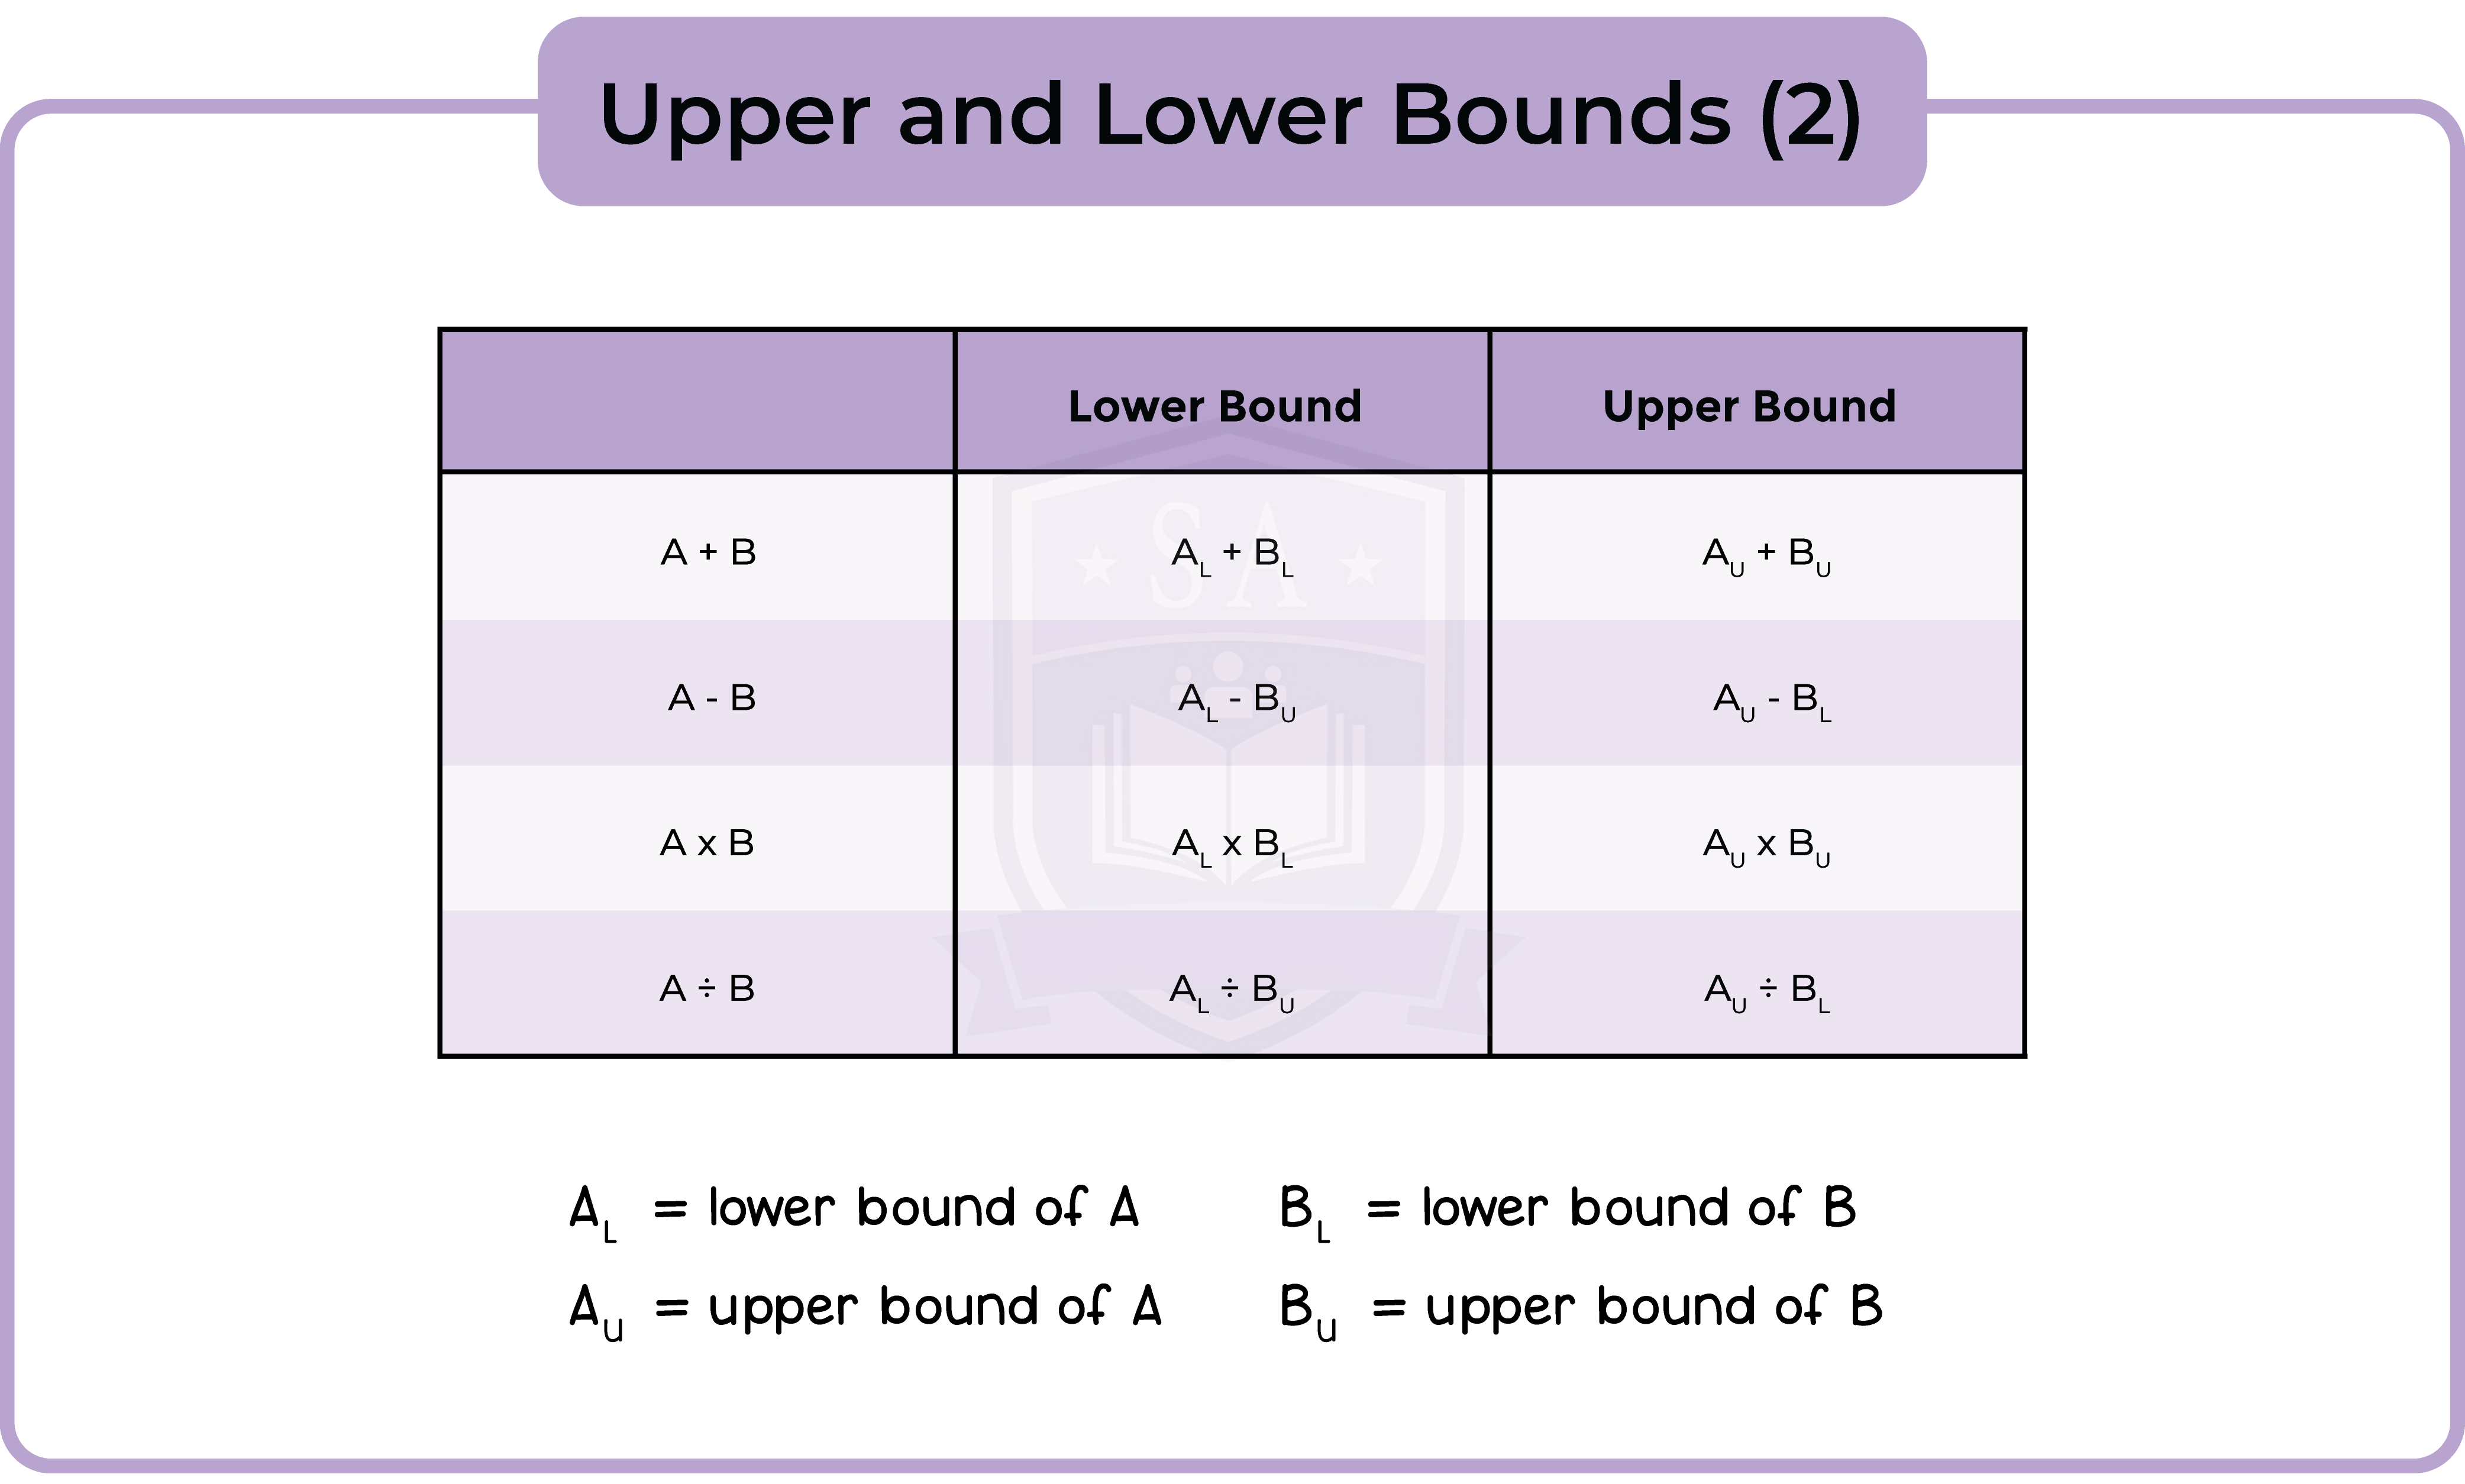 edexcel_igcse_mathematics a_opic 08_degree of accuracy_007_how to calculate upper and lower bounds